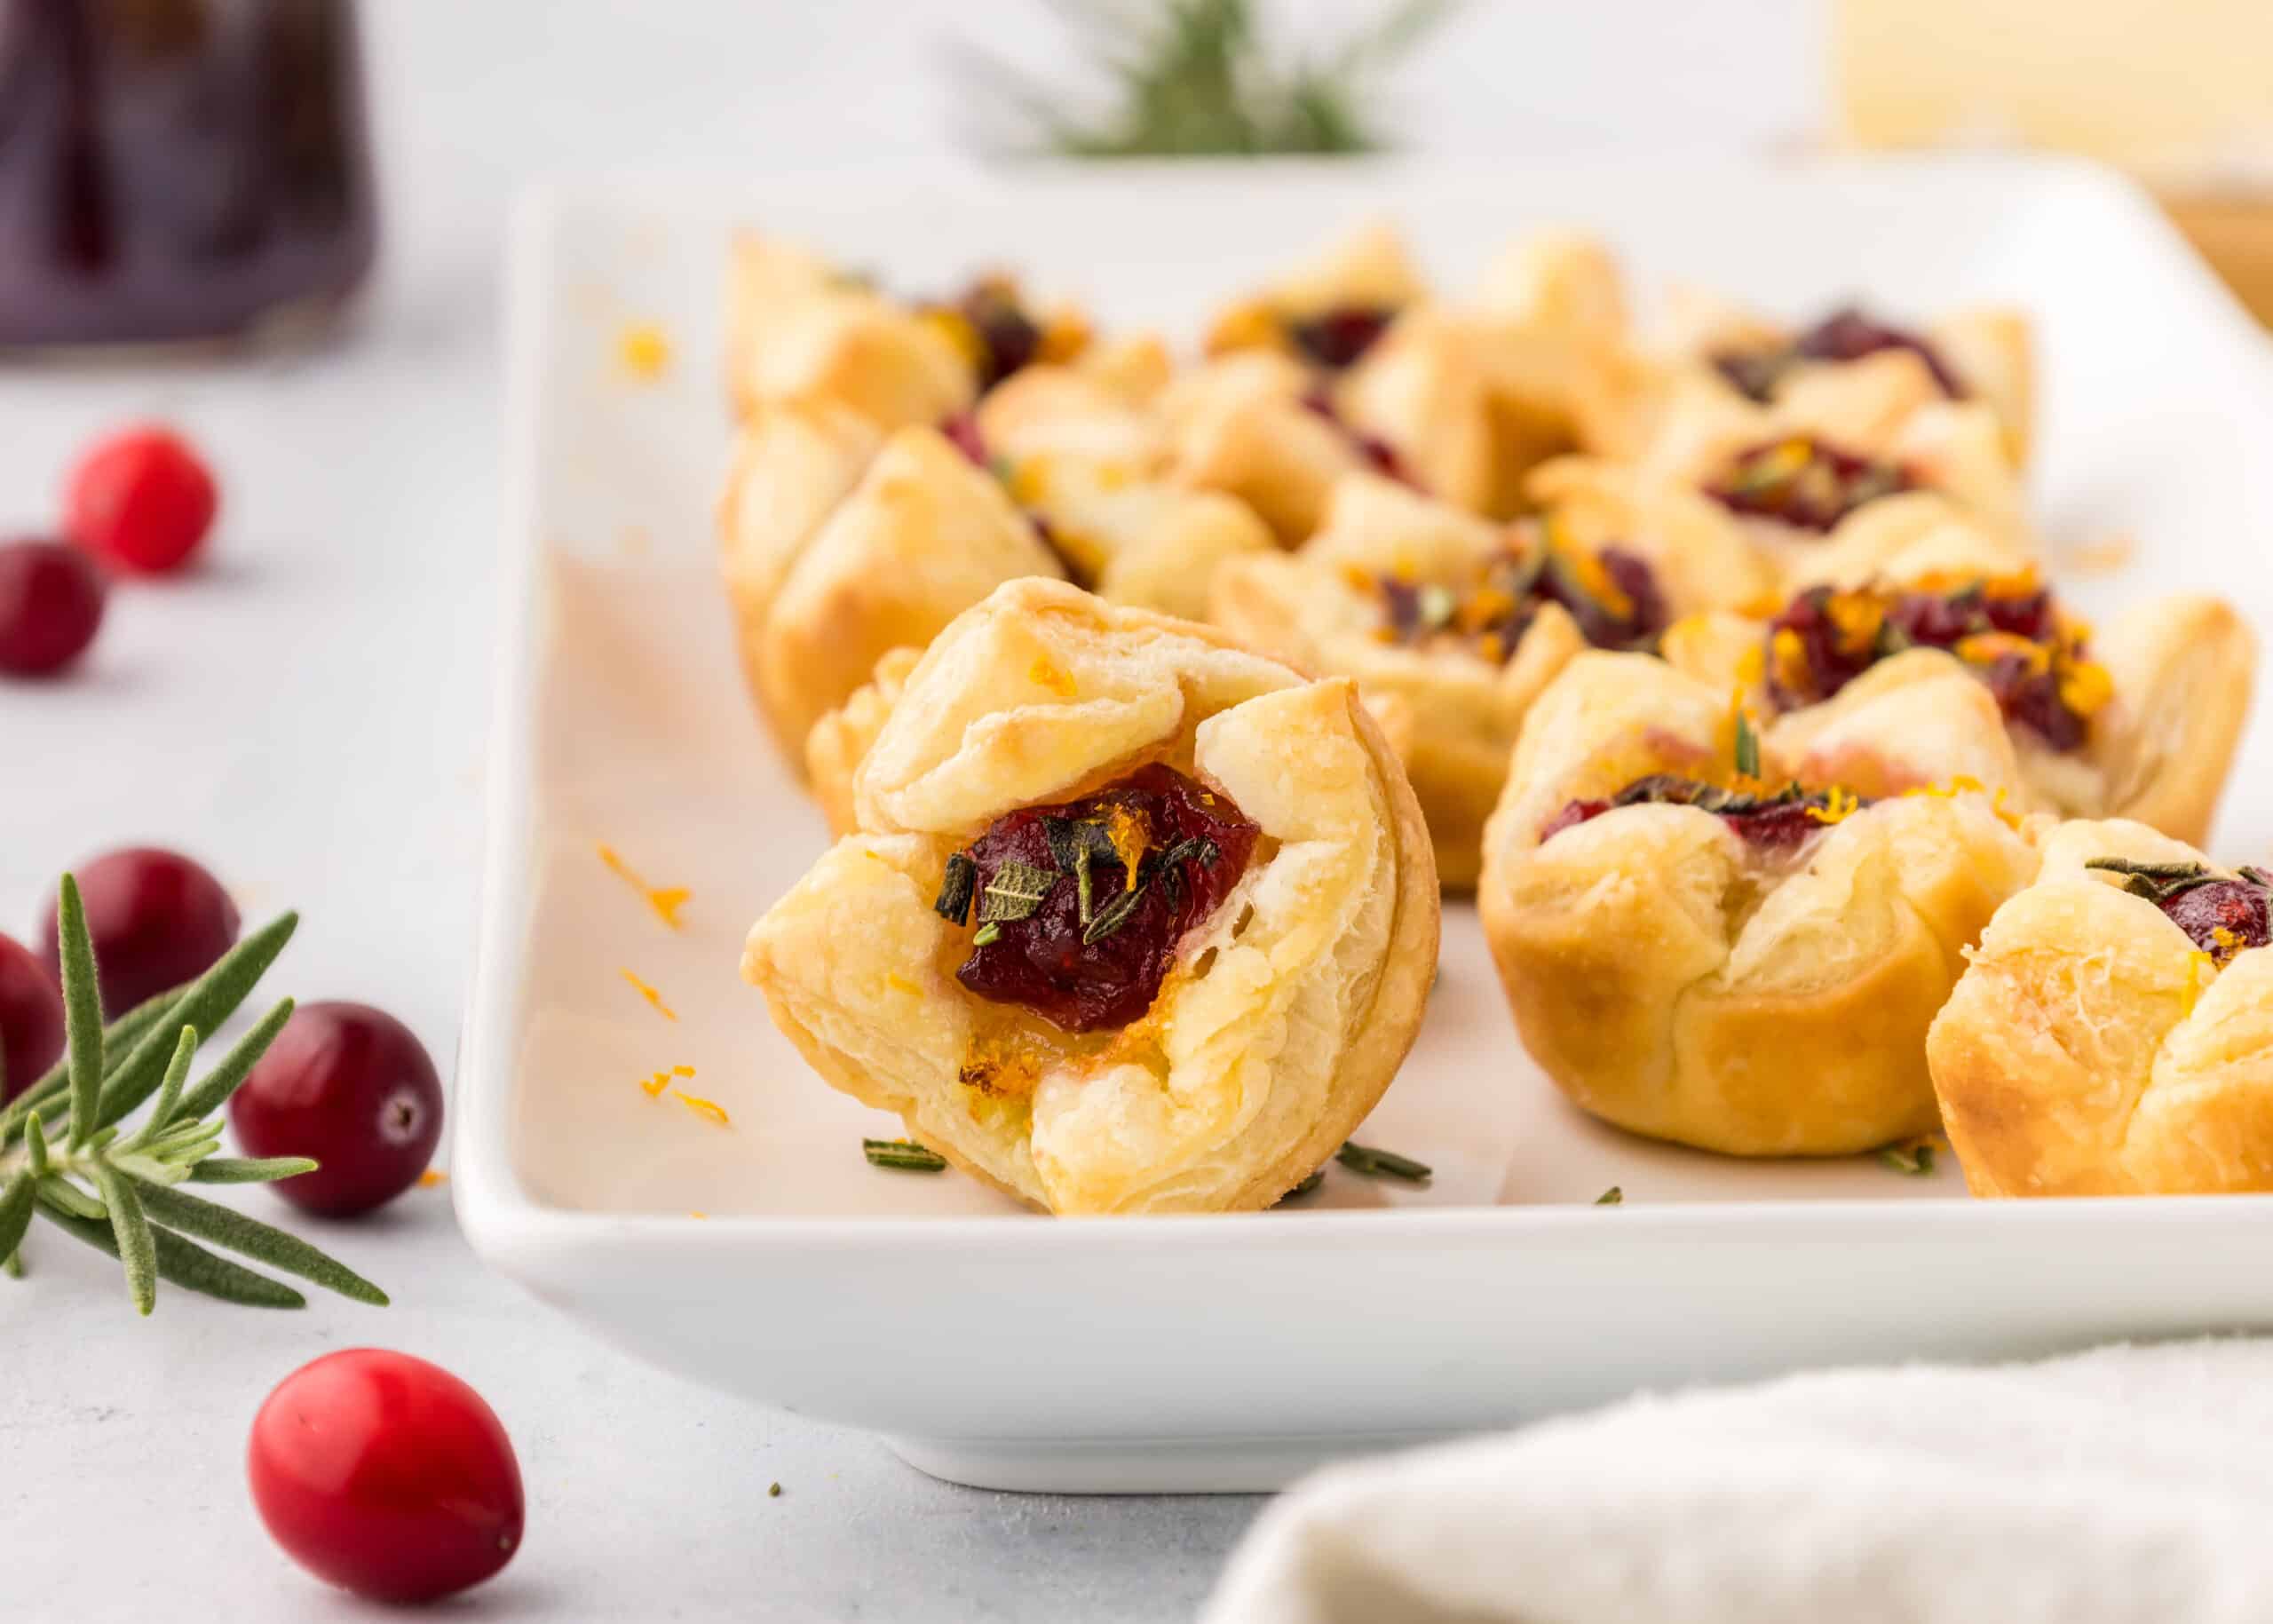 Cranberry and Camembert Bites with Rosemary (baked Camembert with cranberries)